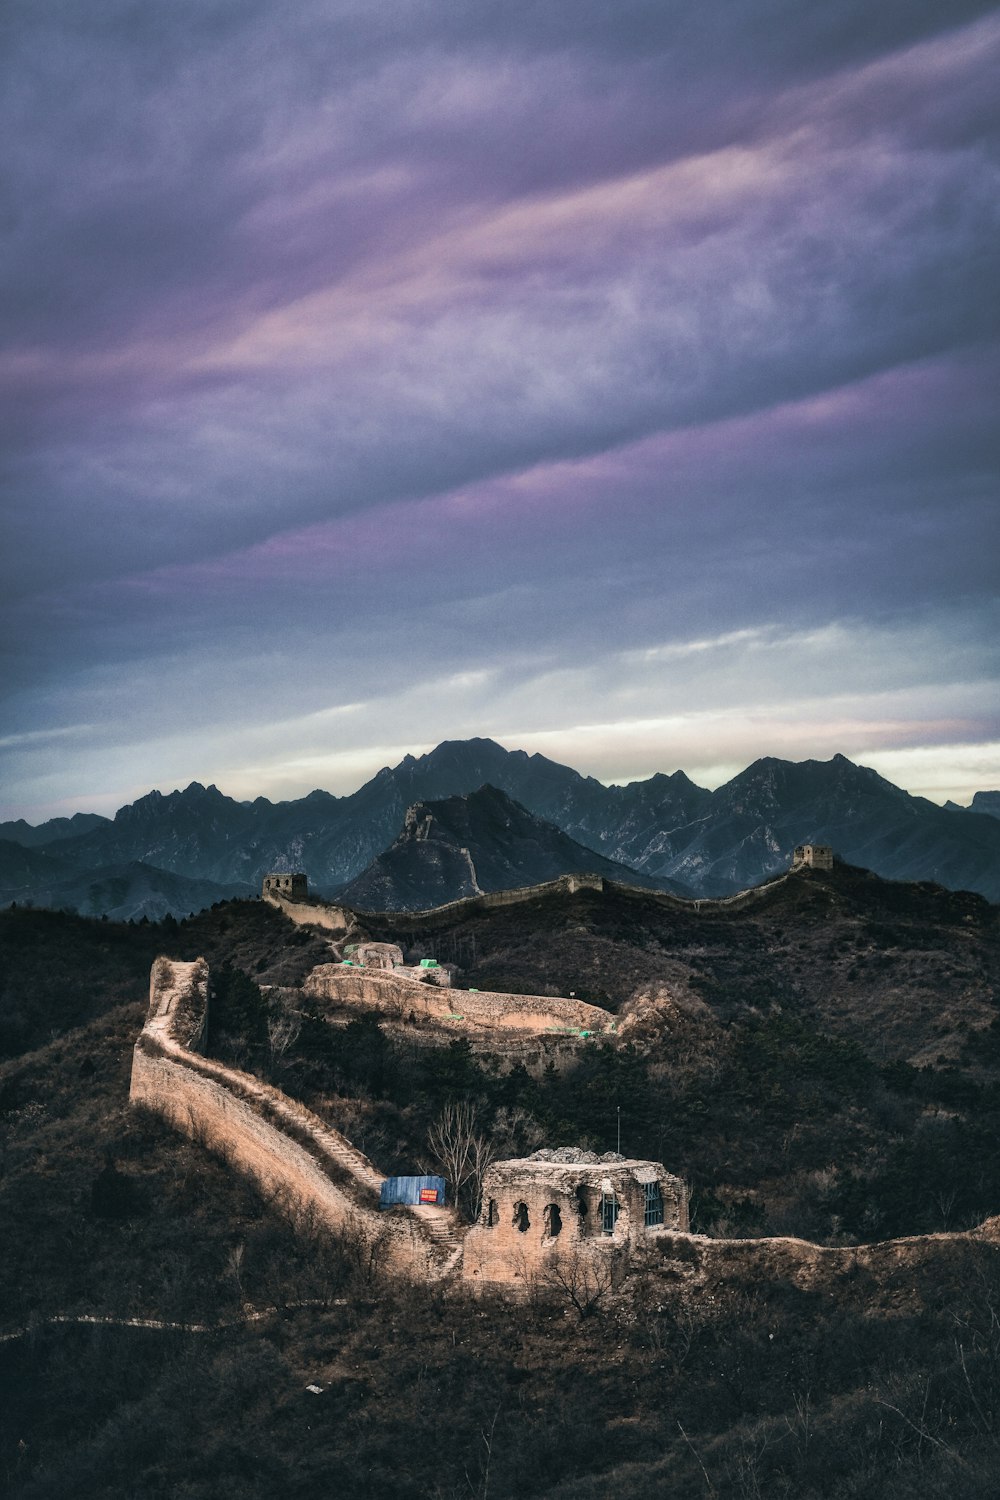 the great wall of china under a cloudy sky